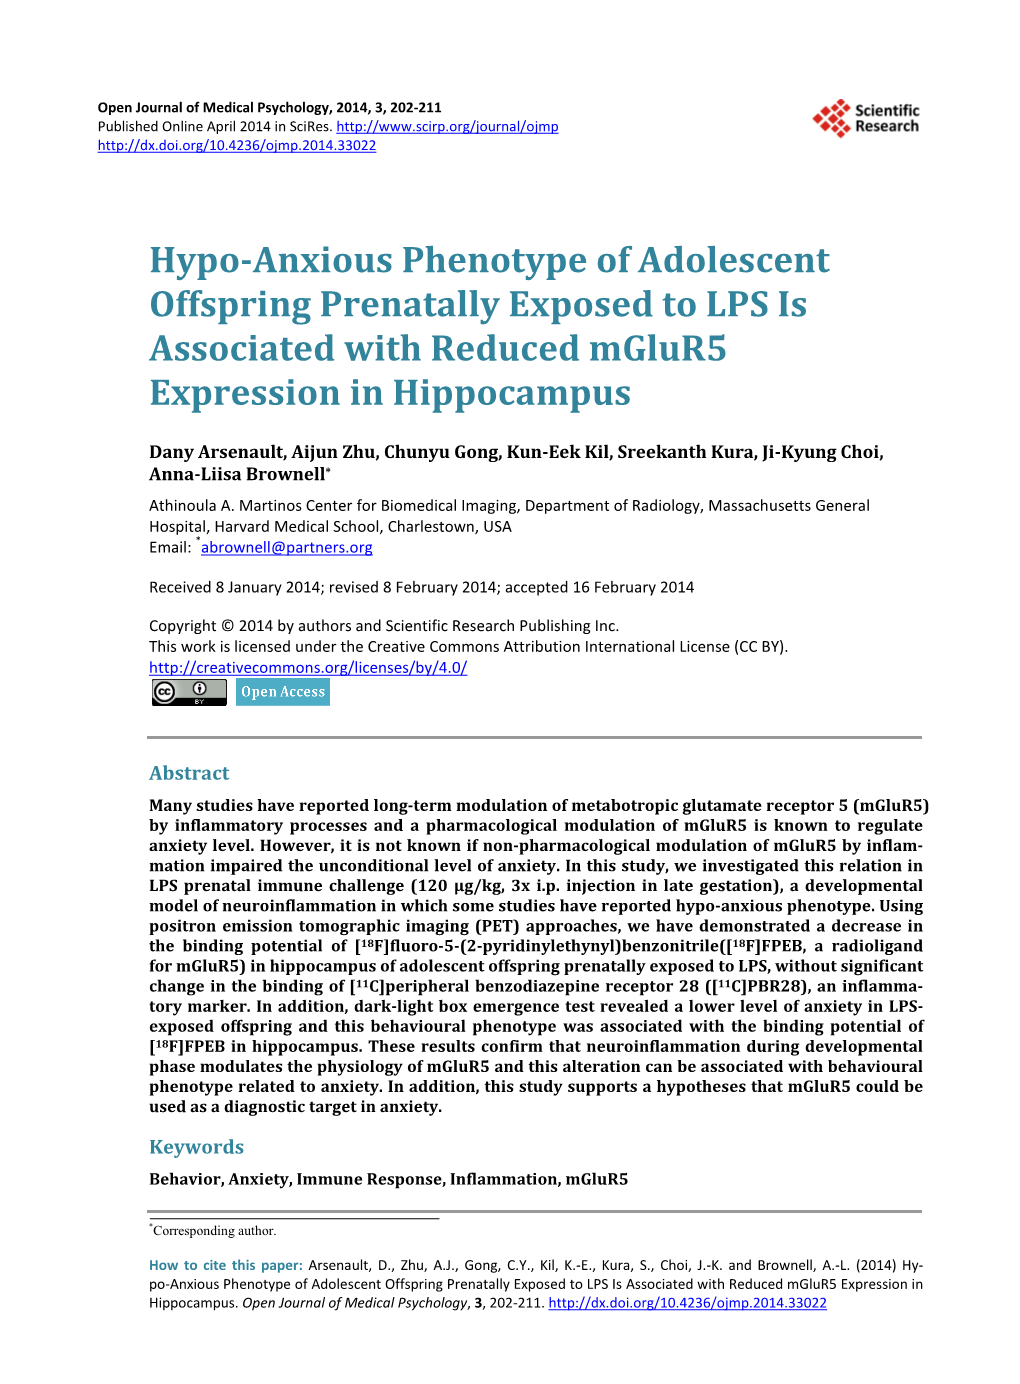 Hypo-Anxious Phenotype of Adolescent Offspring Prenatally Exposed to LPS Is Associated with Reduced Mglur5 Expression in Hippocampus